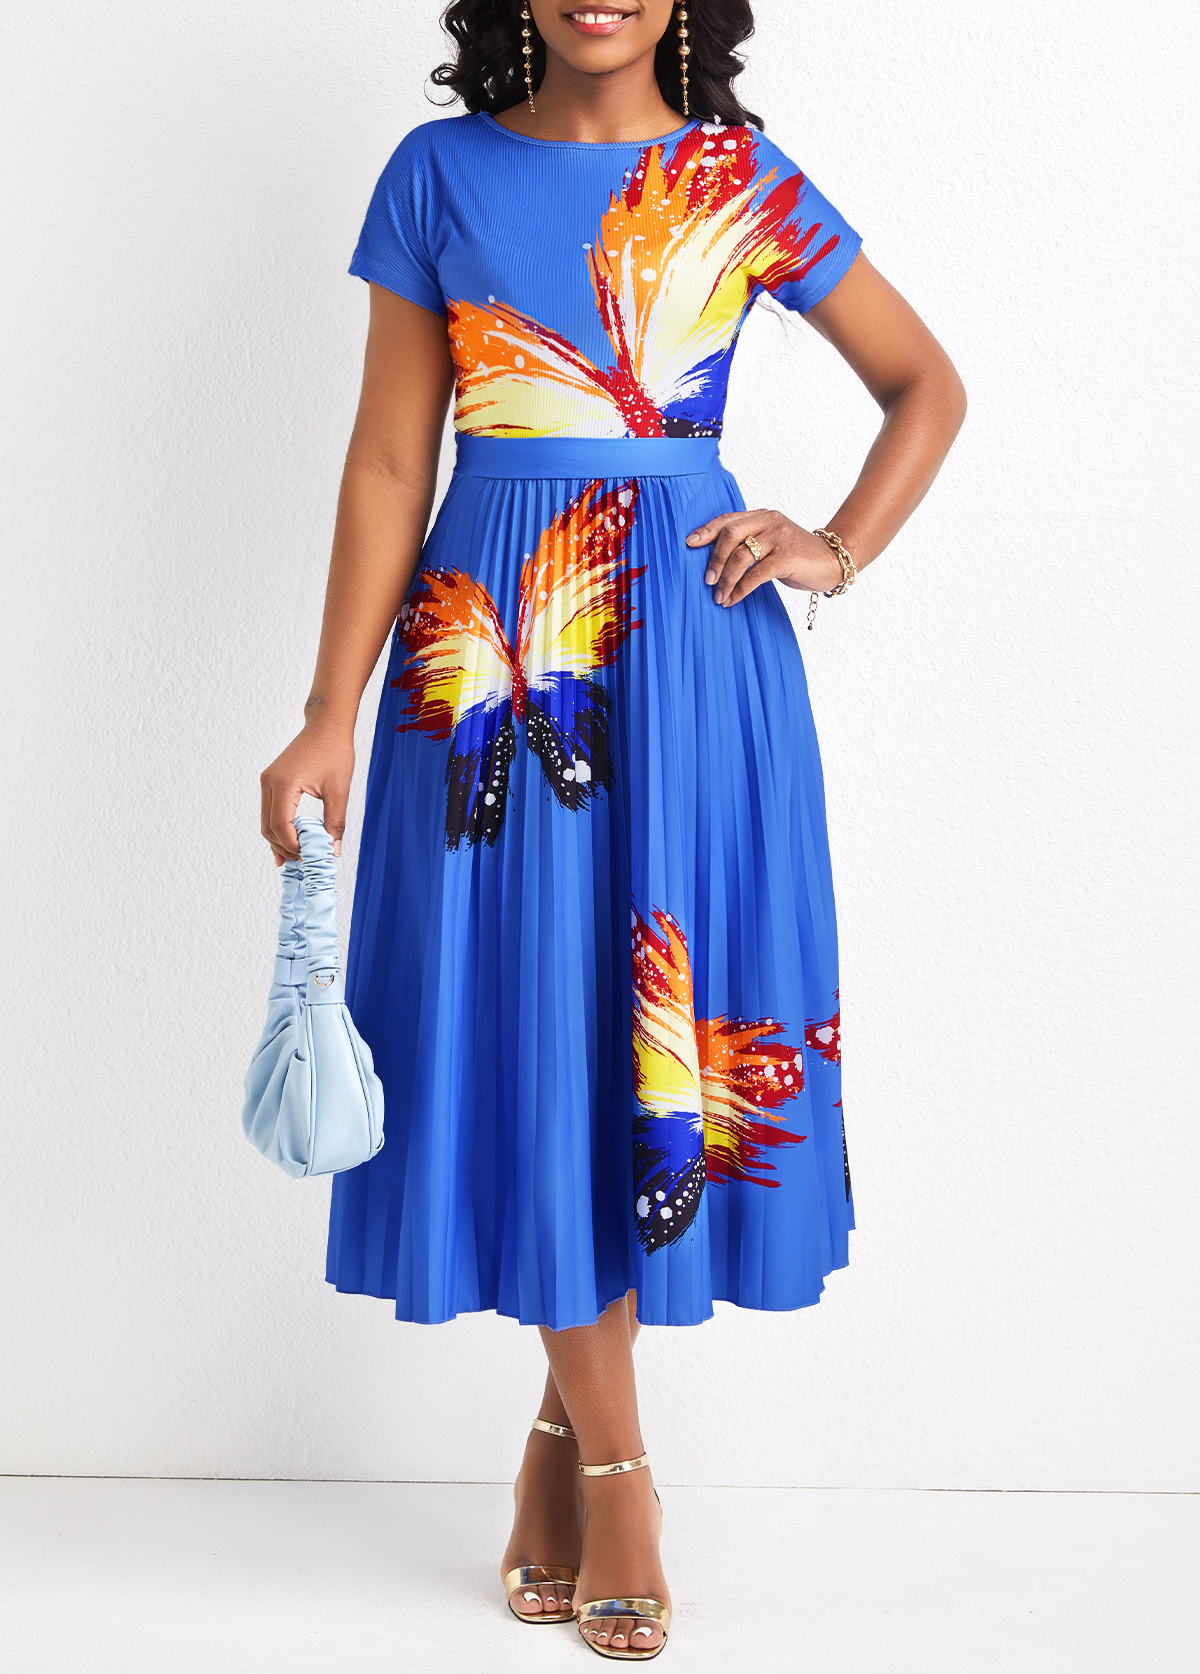 Butterfly Print Pleated Sky Blue Round Neck Dress